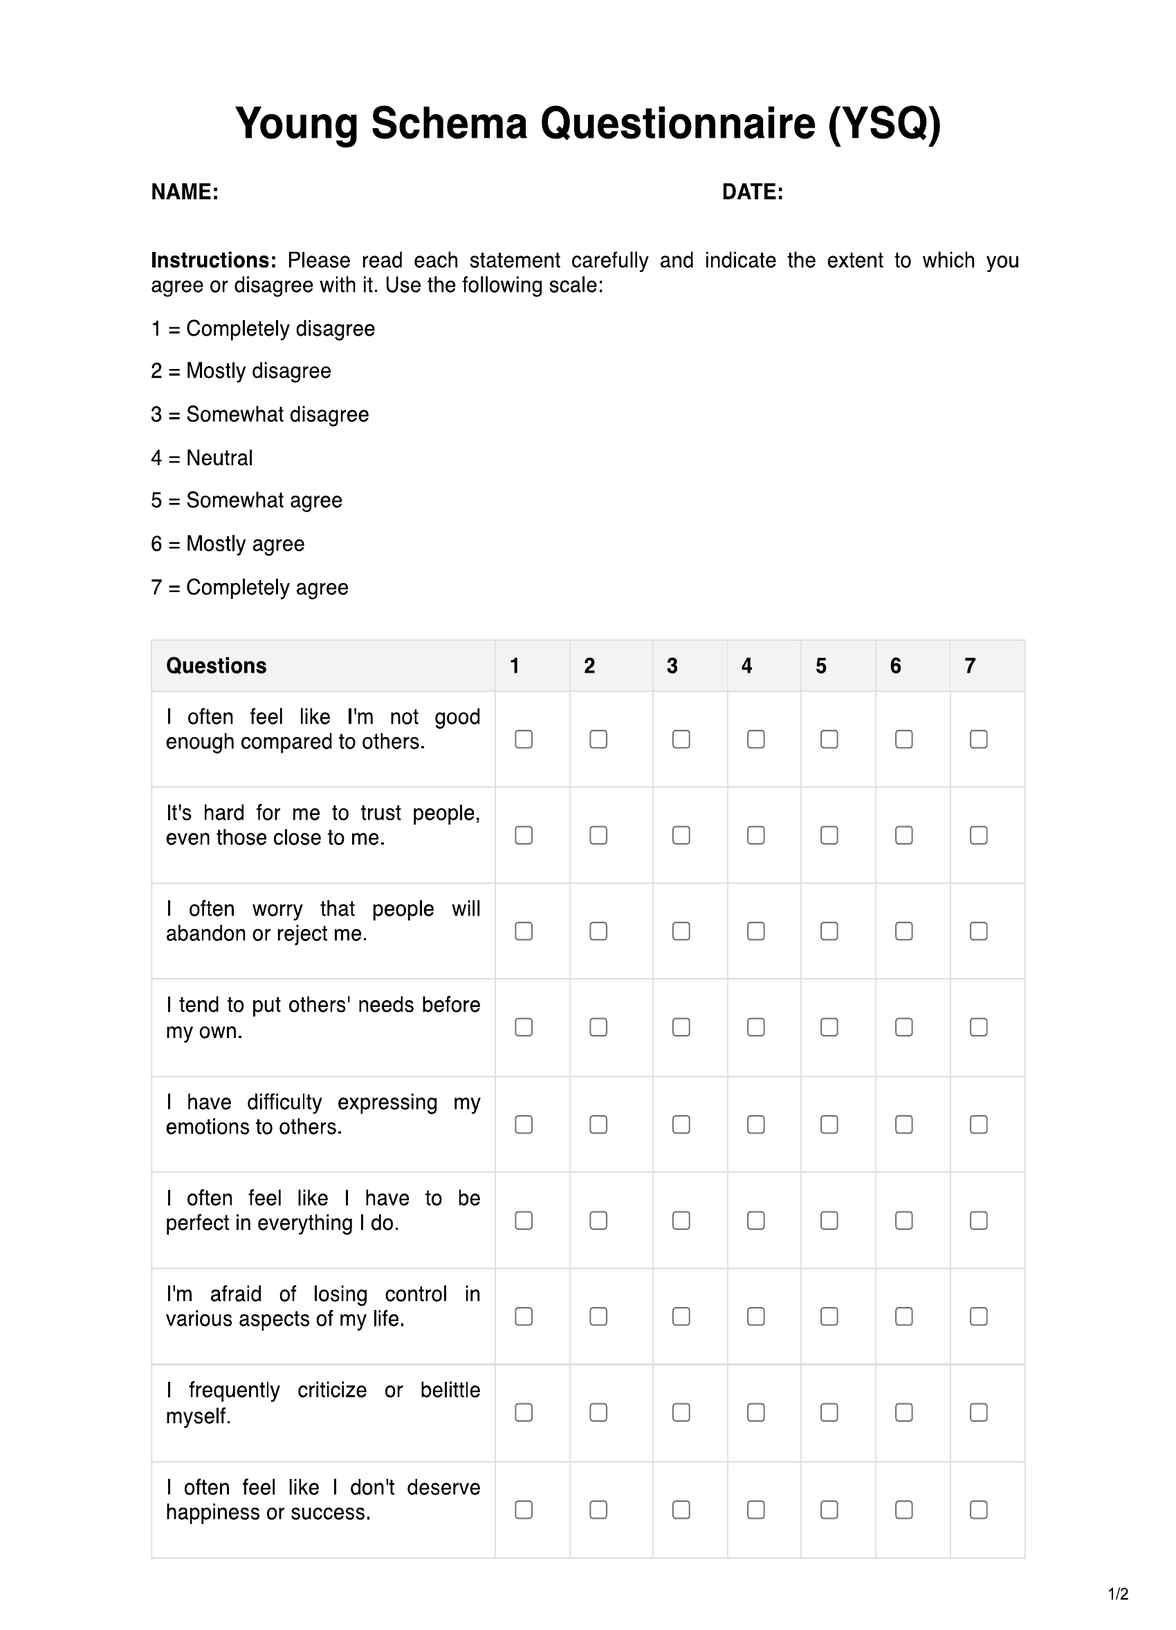 Young Schema Questionnaire PDF Example